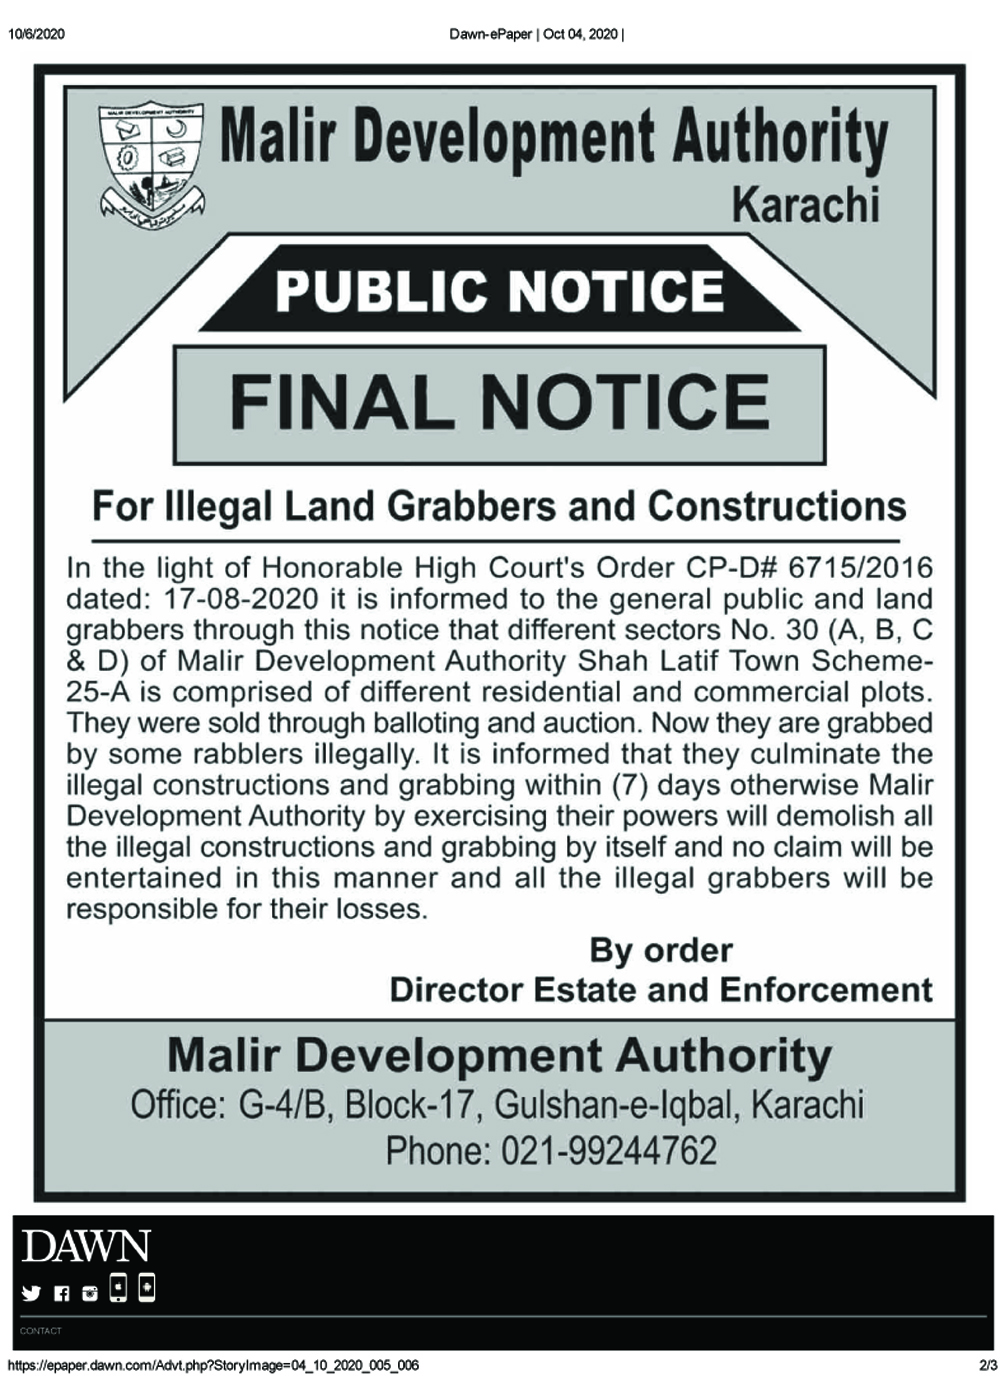 Final Notice For Illegal Land Grabbers And Construction